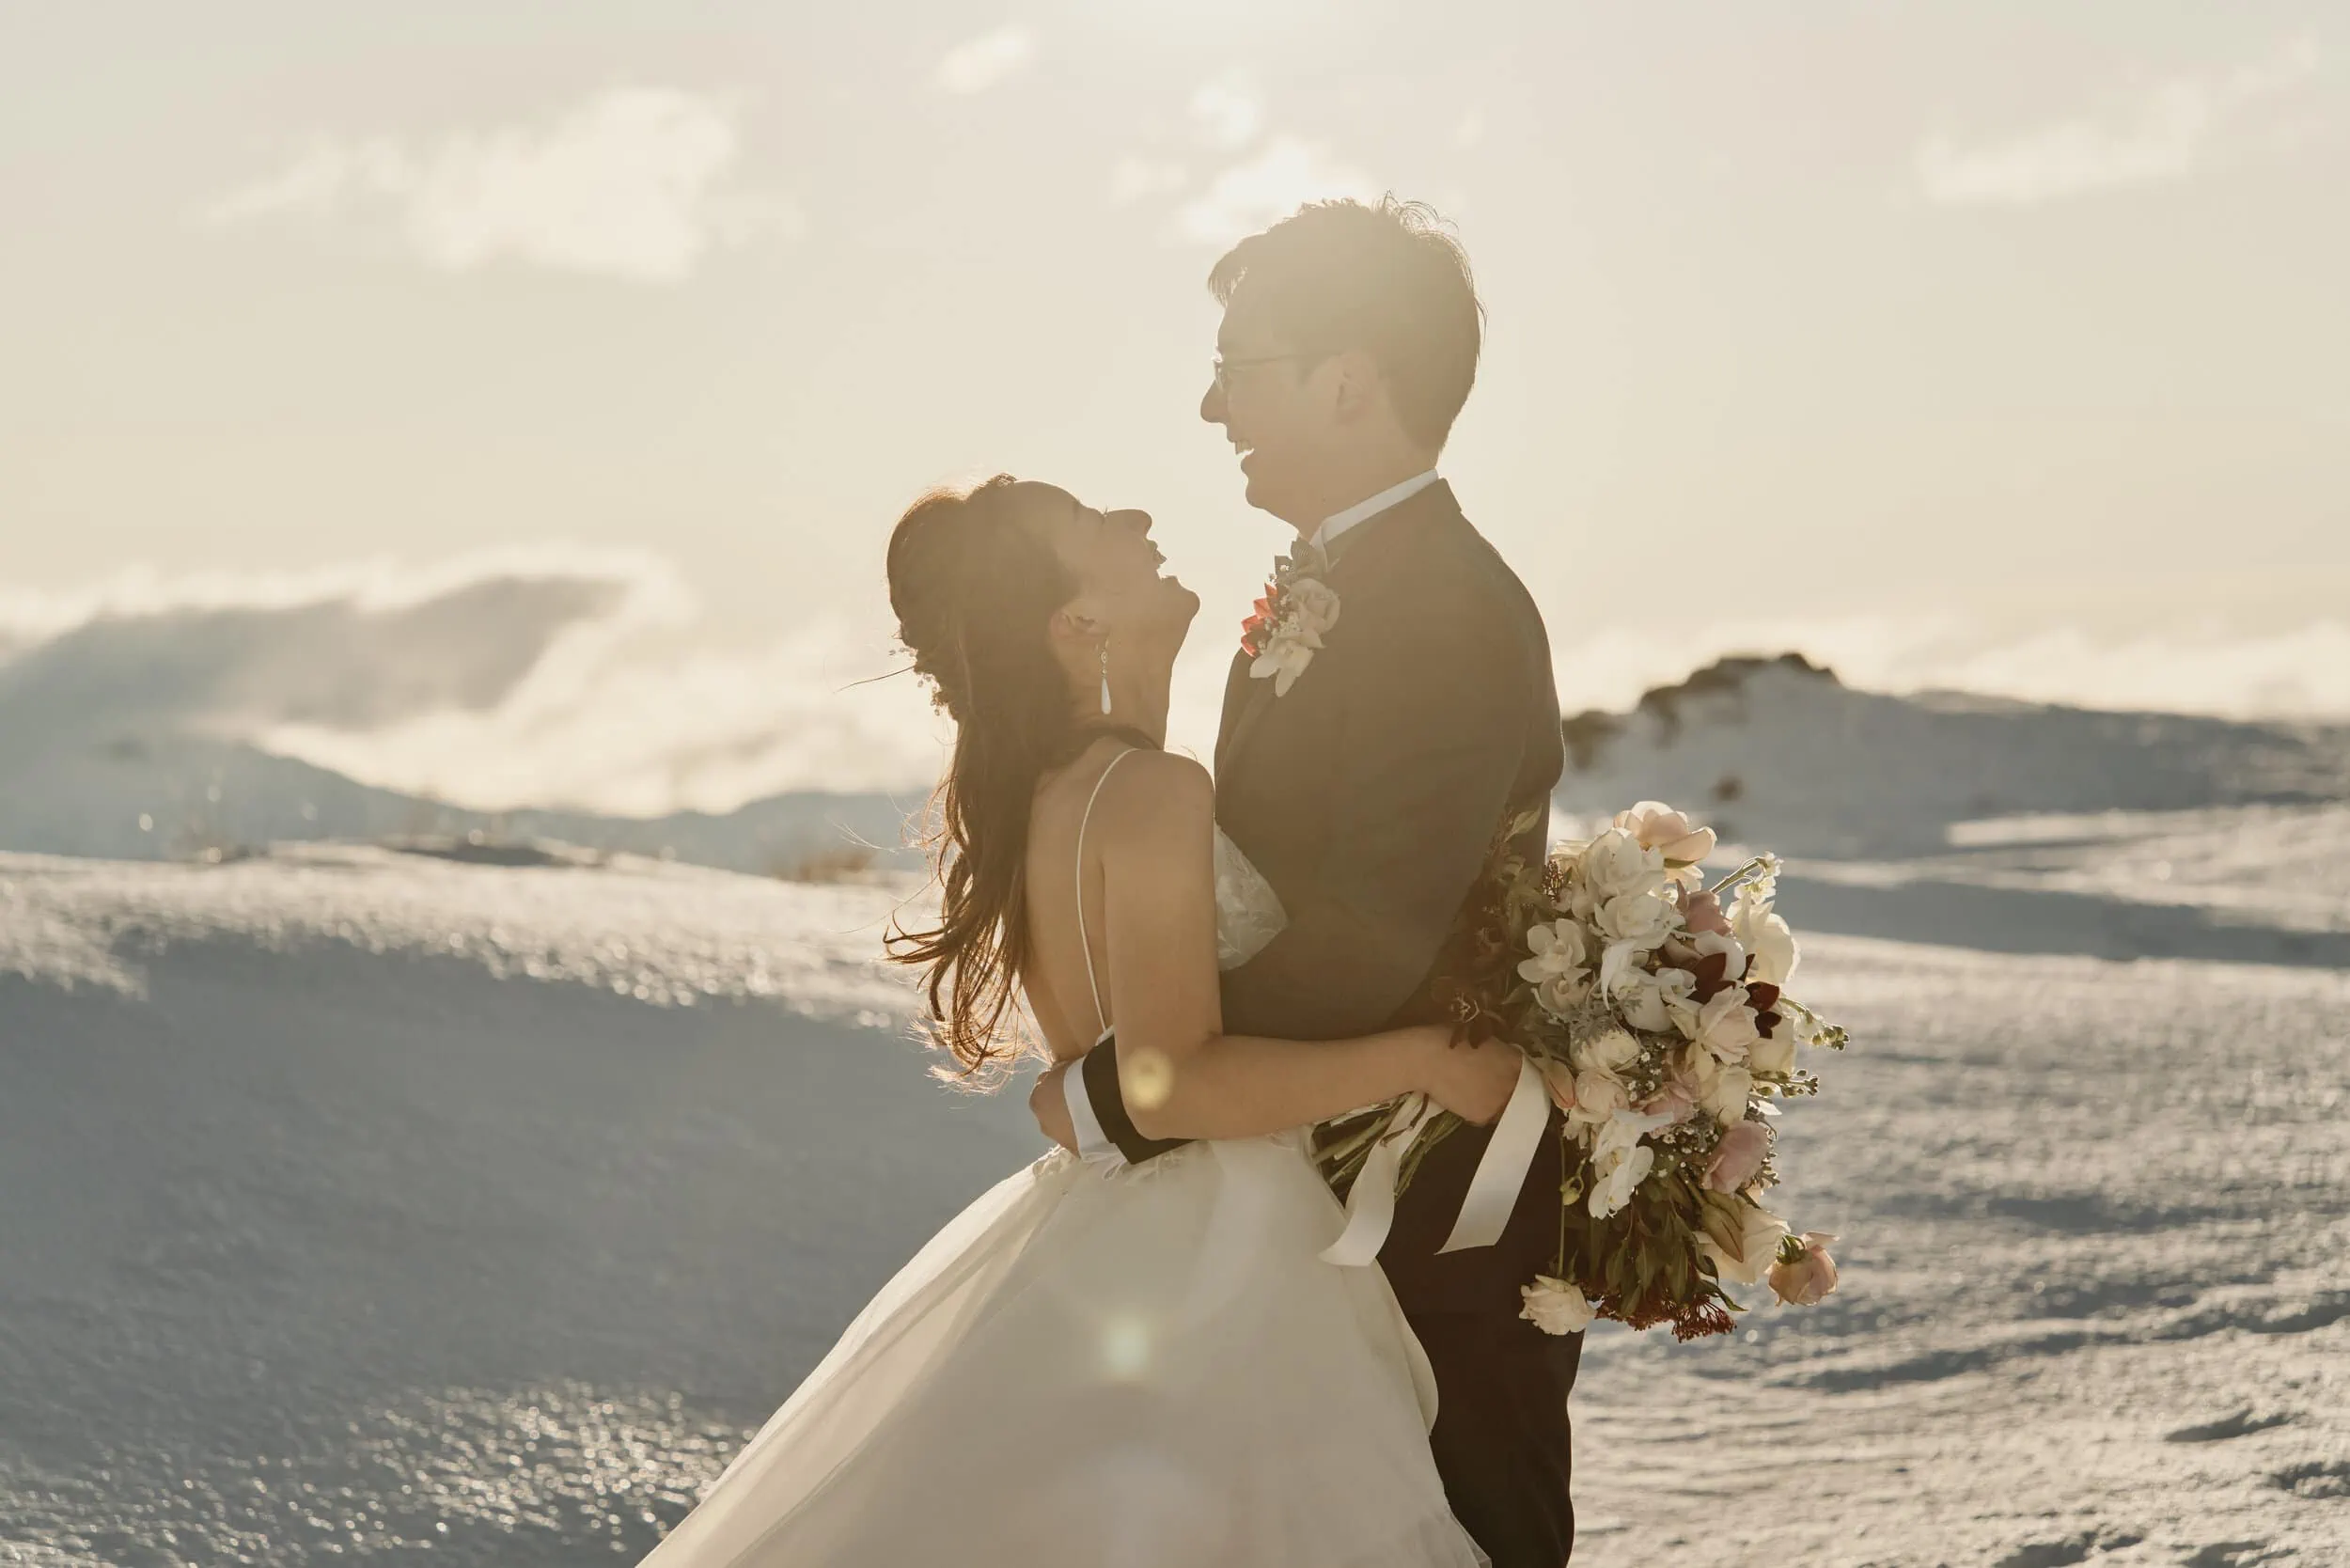 Stephanie and Carven's romantic elopement captured amidst the breathtaking scenery of the Remarkables